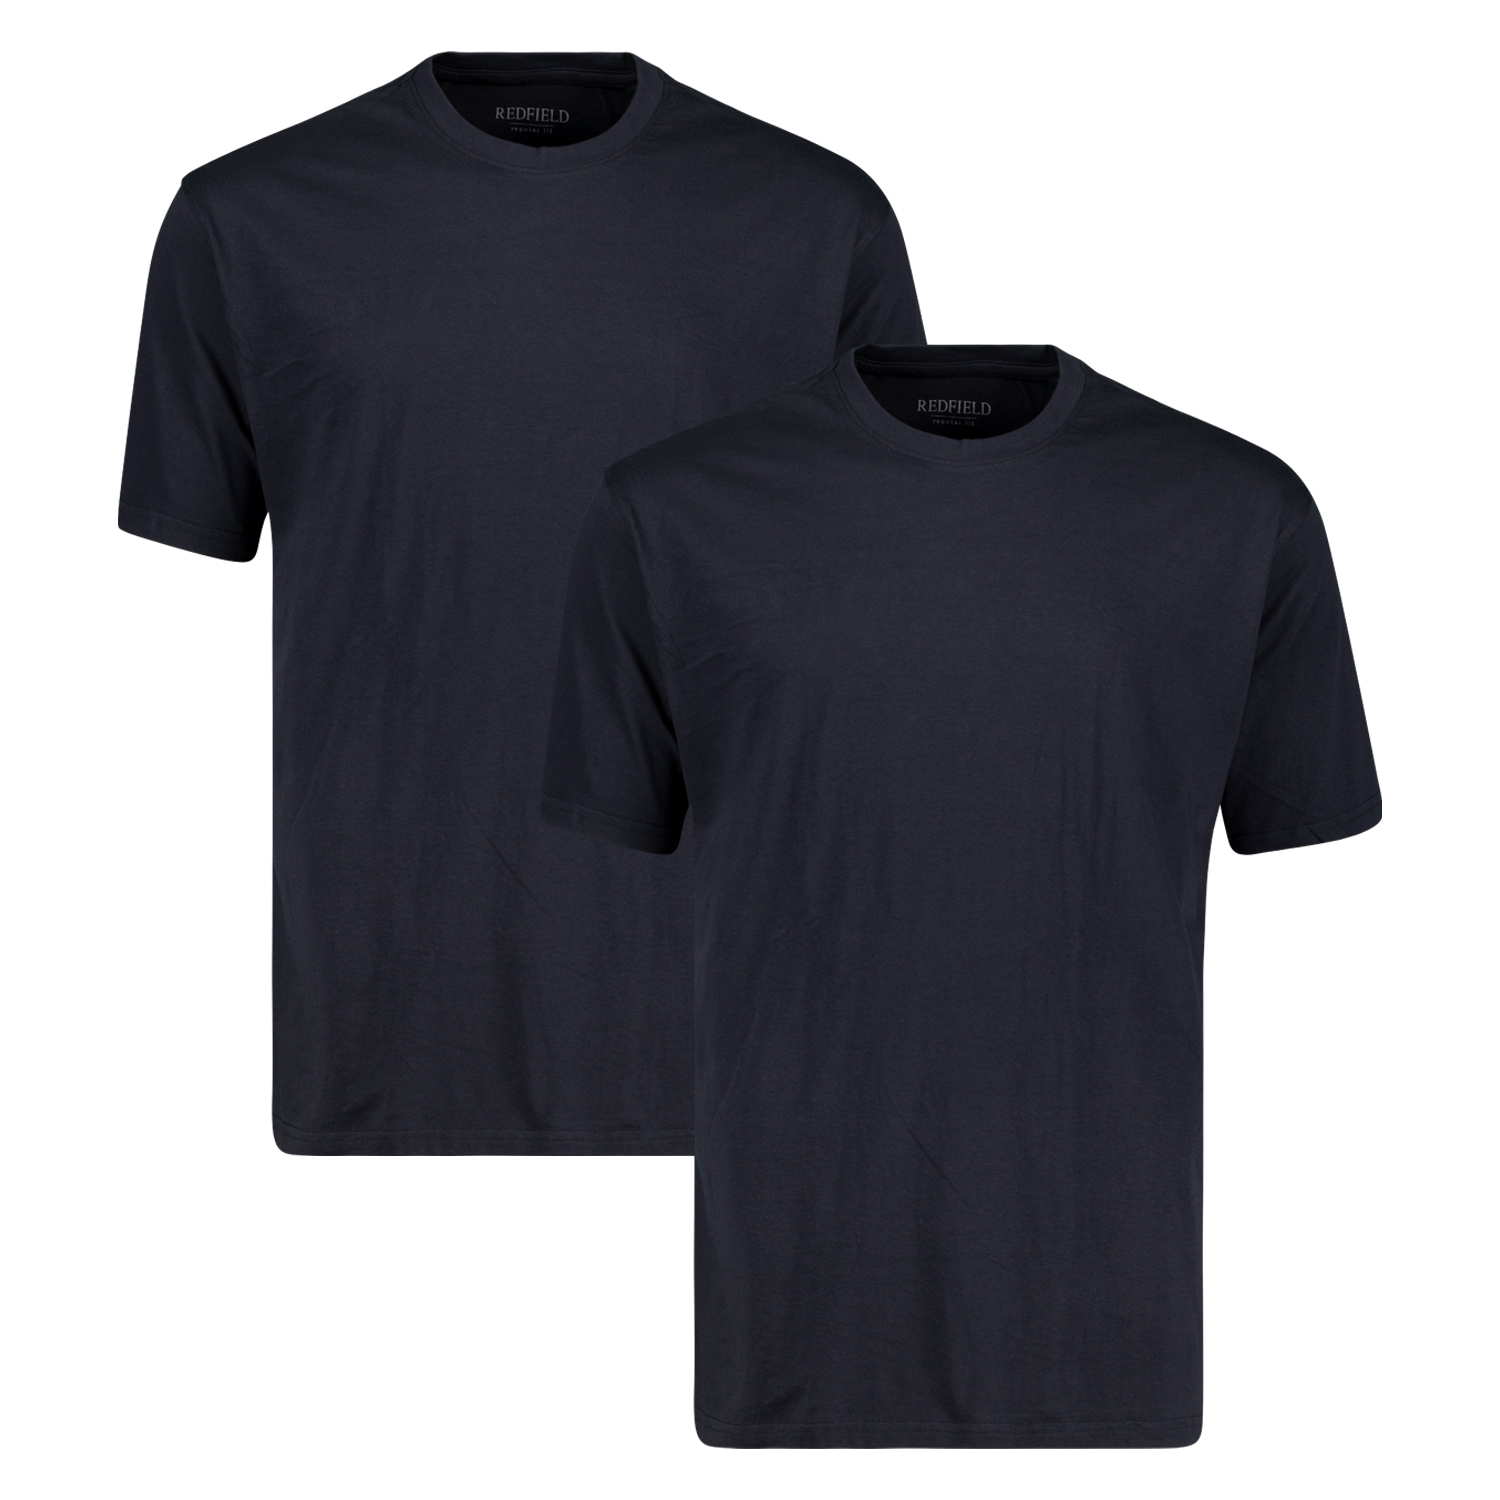 Twin-pack dark blue t-shirt by Redfield in oversizes up to 10XL